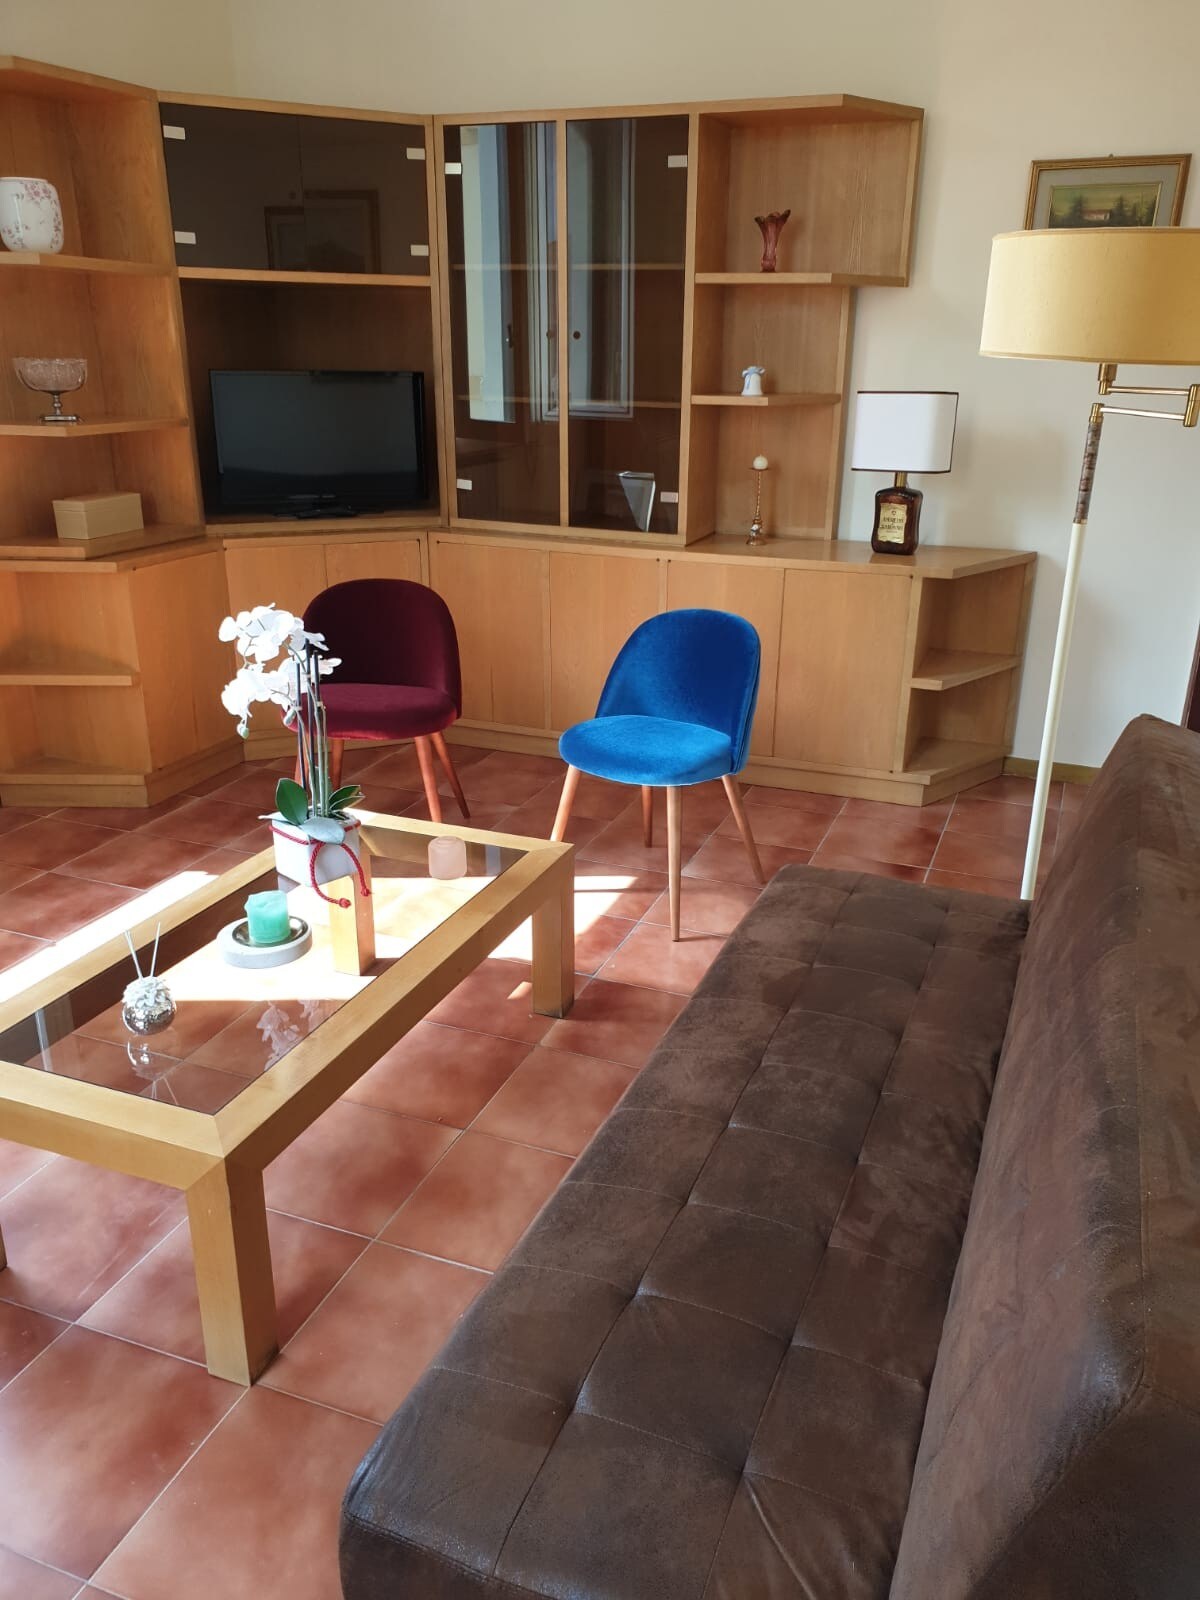 Strategic! Perfect Apartment for visiting Tuscany!